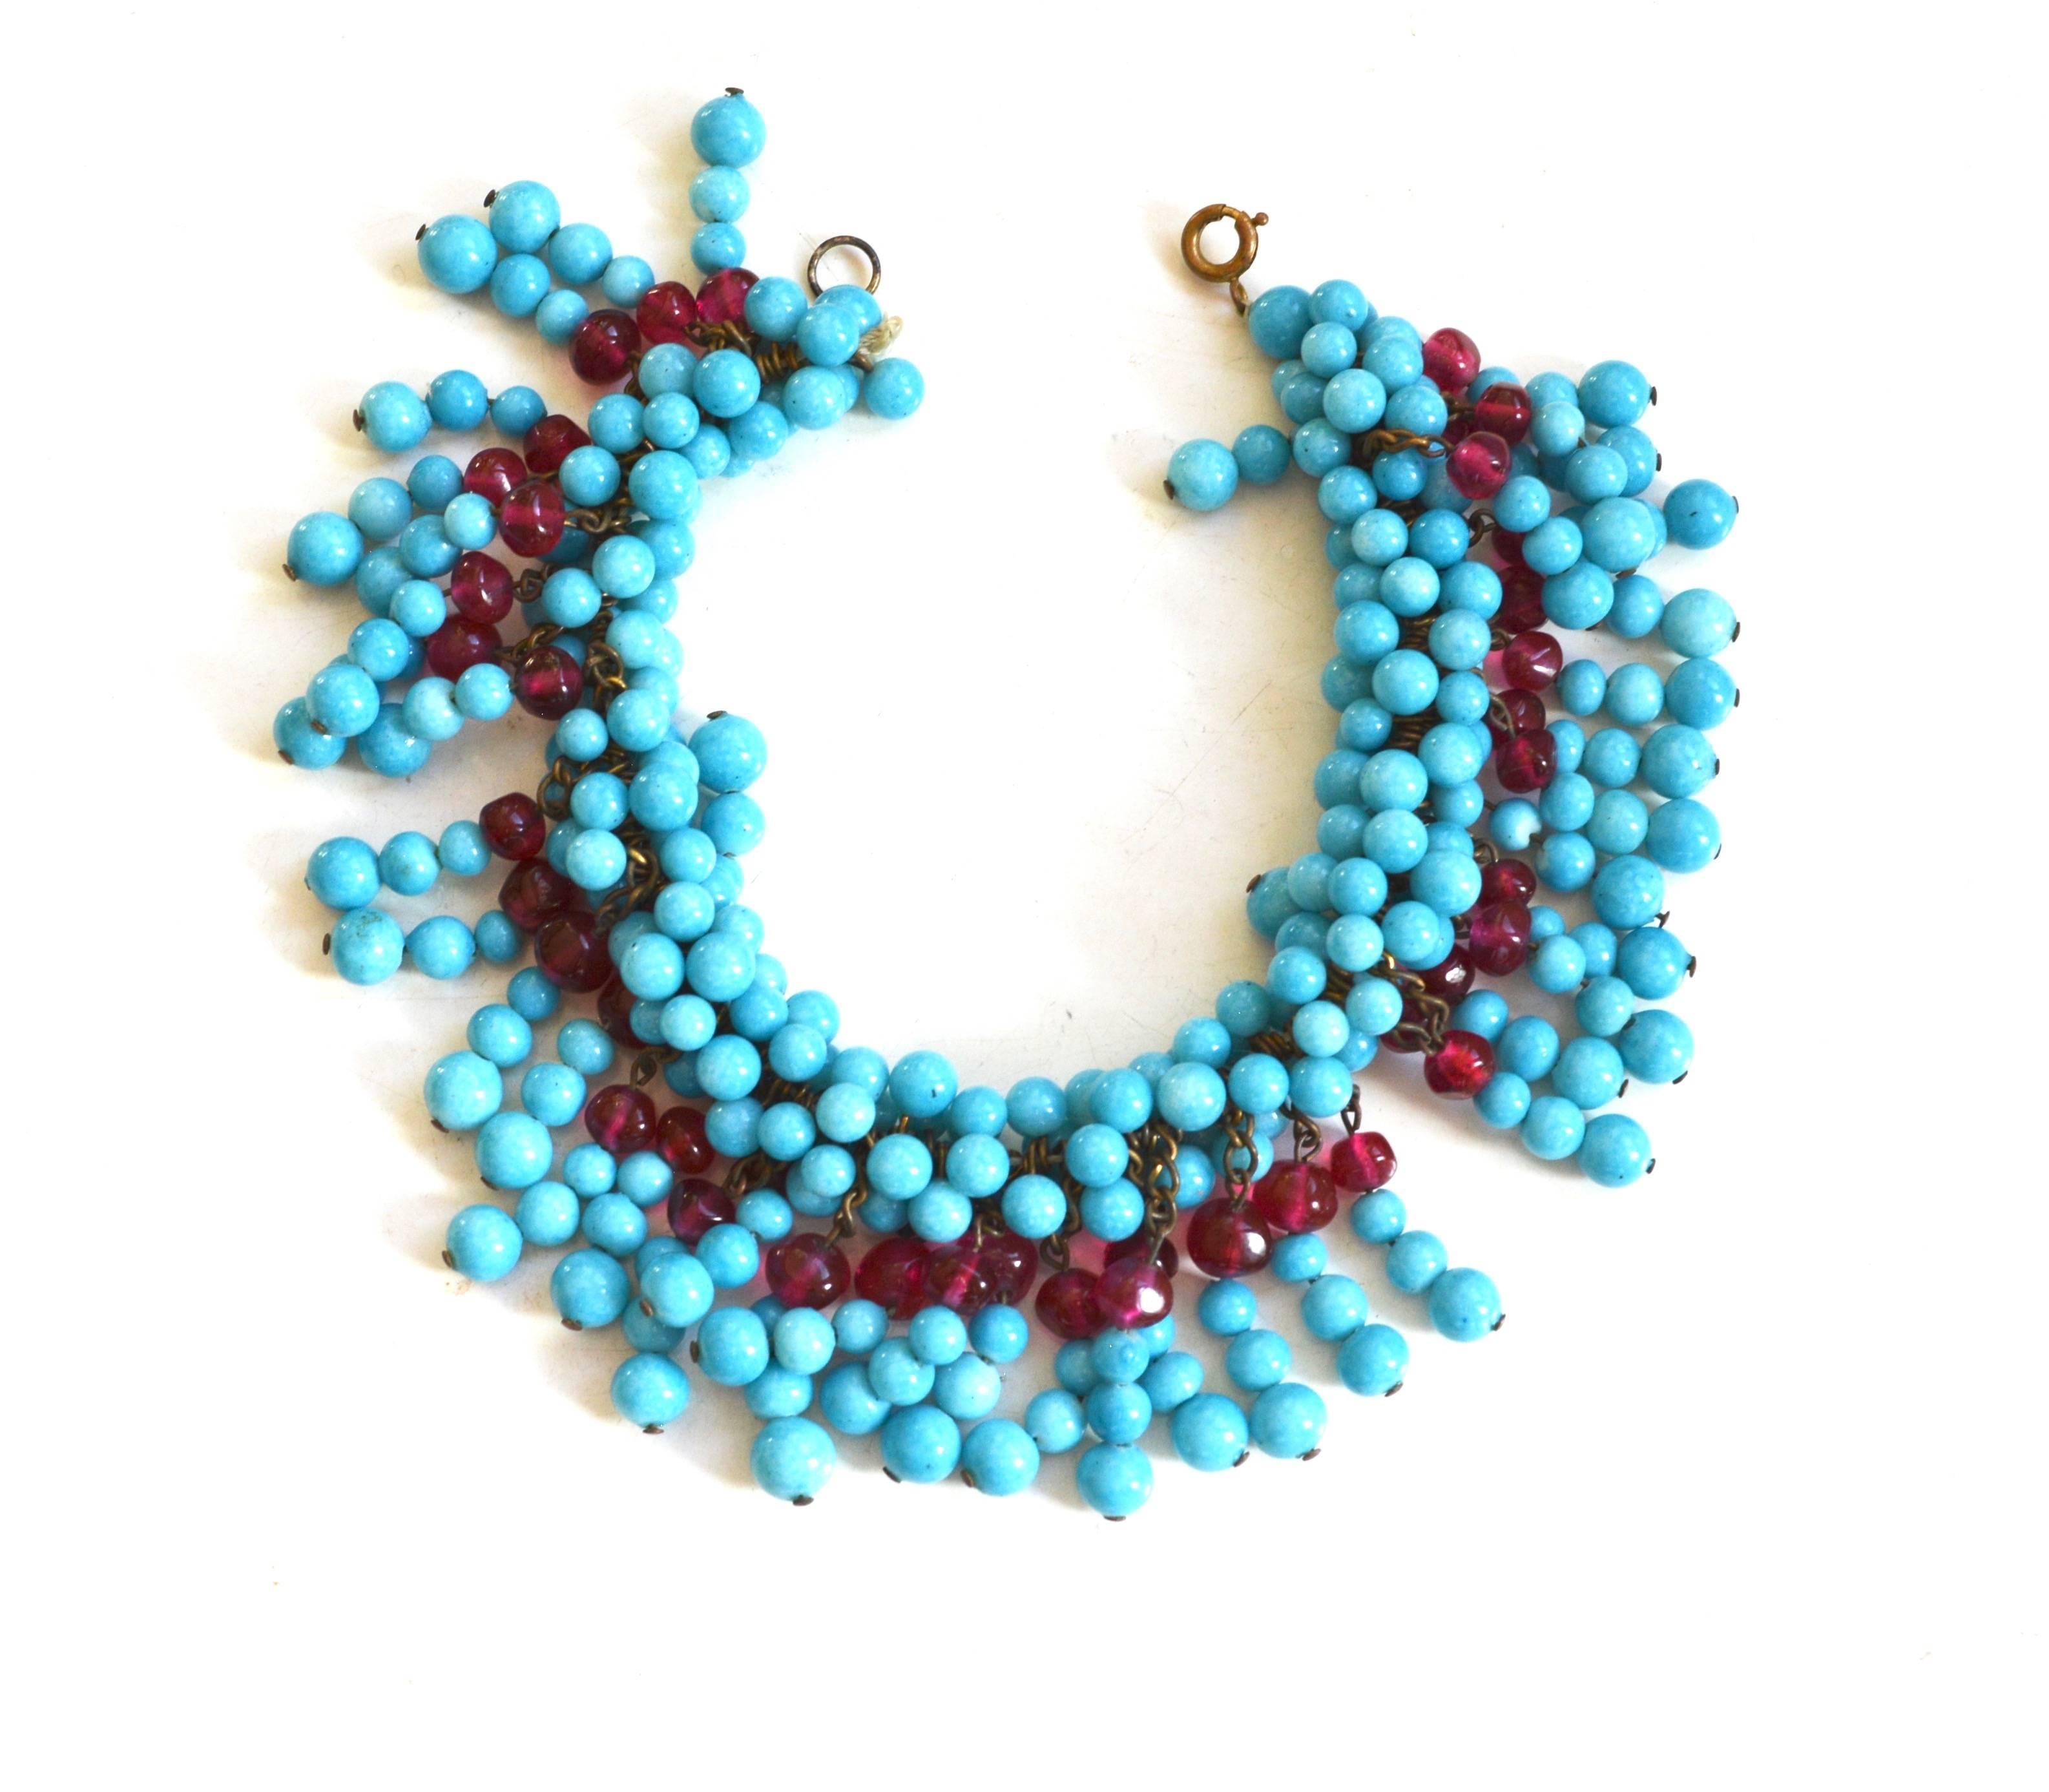 Gorgeous rare couture turquoise and berry Gripoix bead set. Marked France.  Circa 1940s hand strung on cotton with various links and chains. Such early Gripoix pieces were often beaded. Possibly for Chanel. Extremely unique lush look.  Condition is